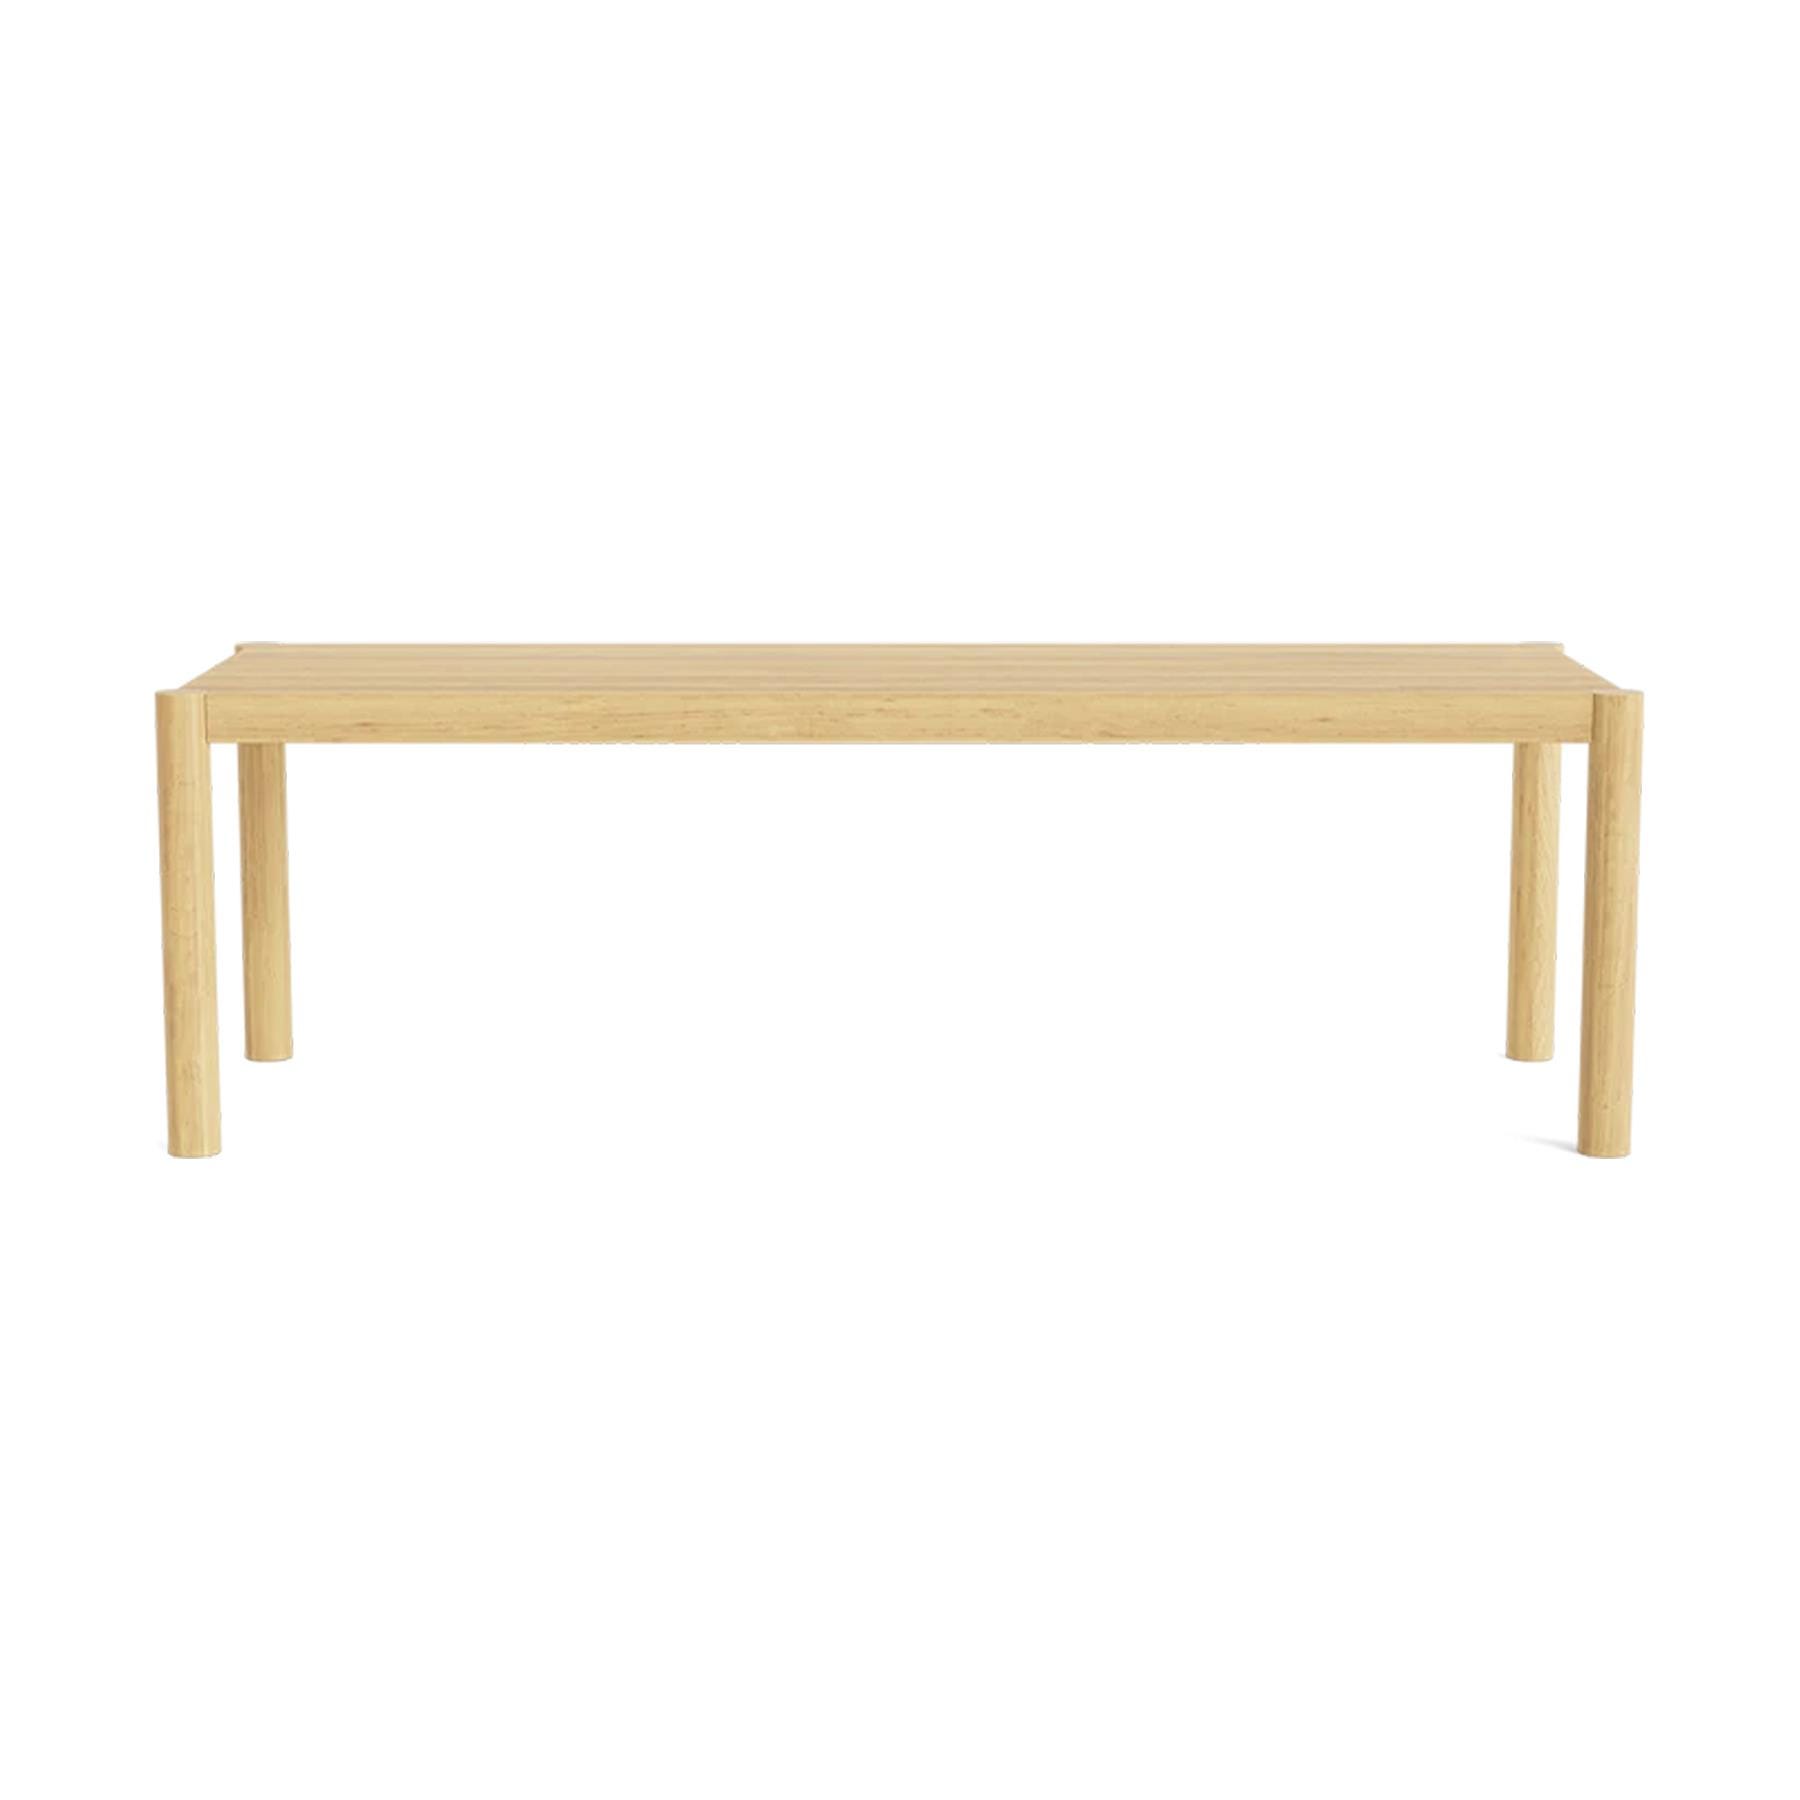 Make Nordic Tammi Coffee Table Rectangle Height 45cm Oak Natural Oil Light Wood Designer Furniture From Holloways Of Ludlow